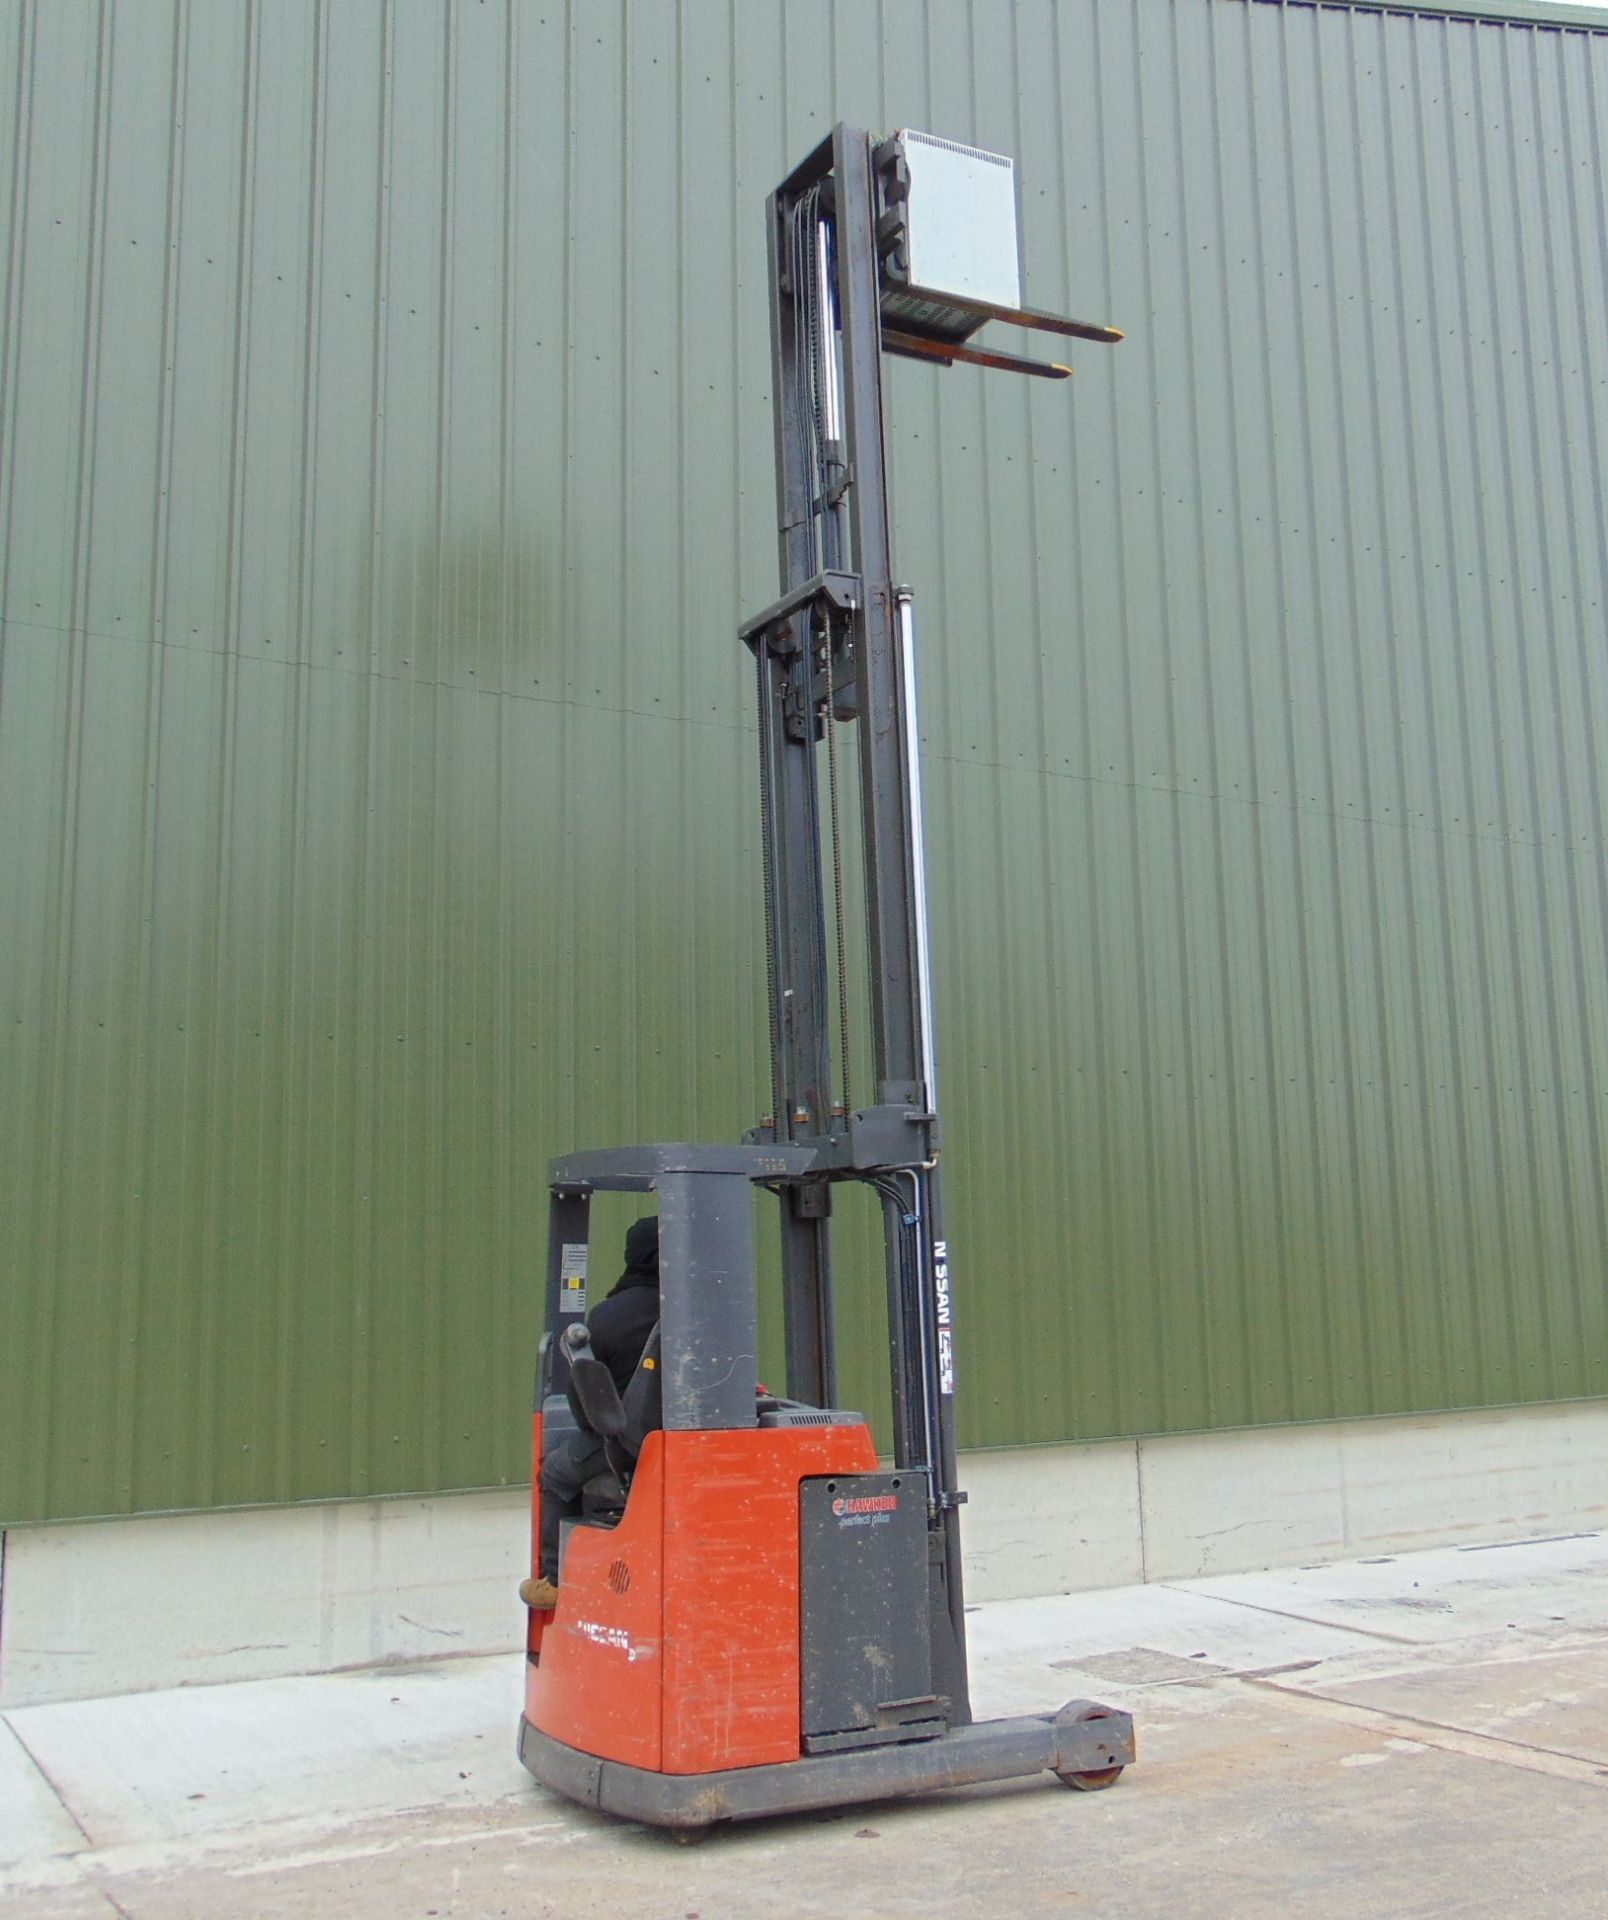 Nissan UNS-200 Electric Reach Fork Lift w/ Battery Charger Unit 2283 hrs - Image 16 of 31